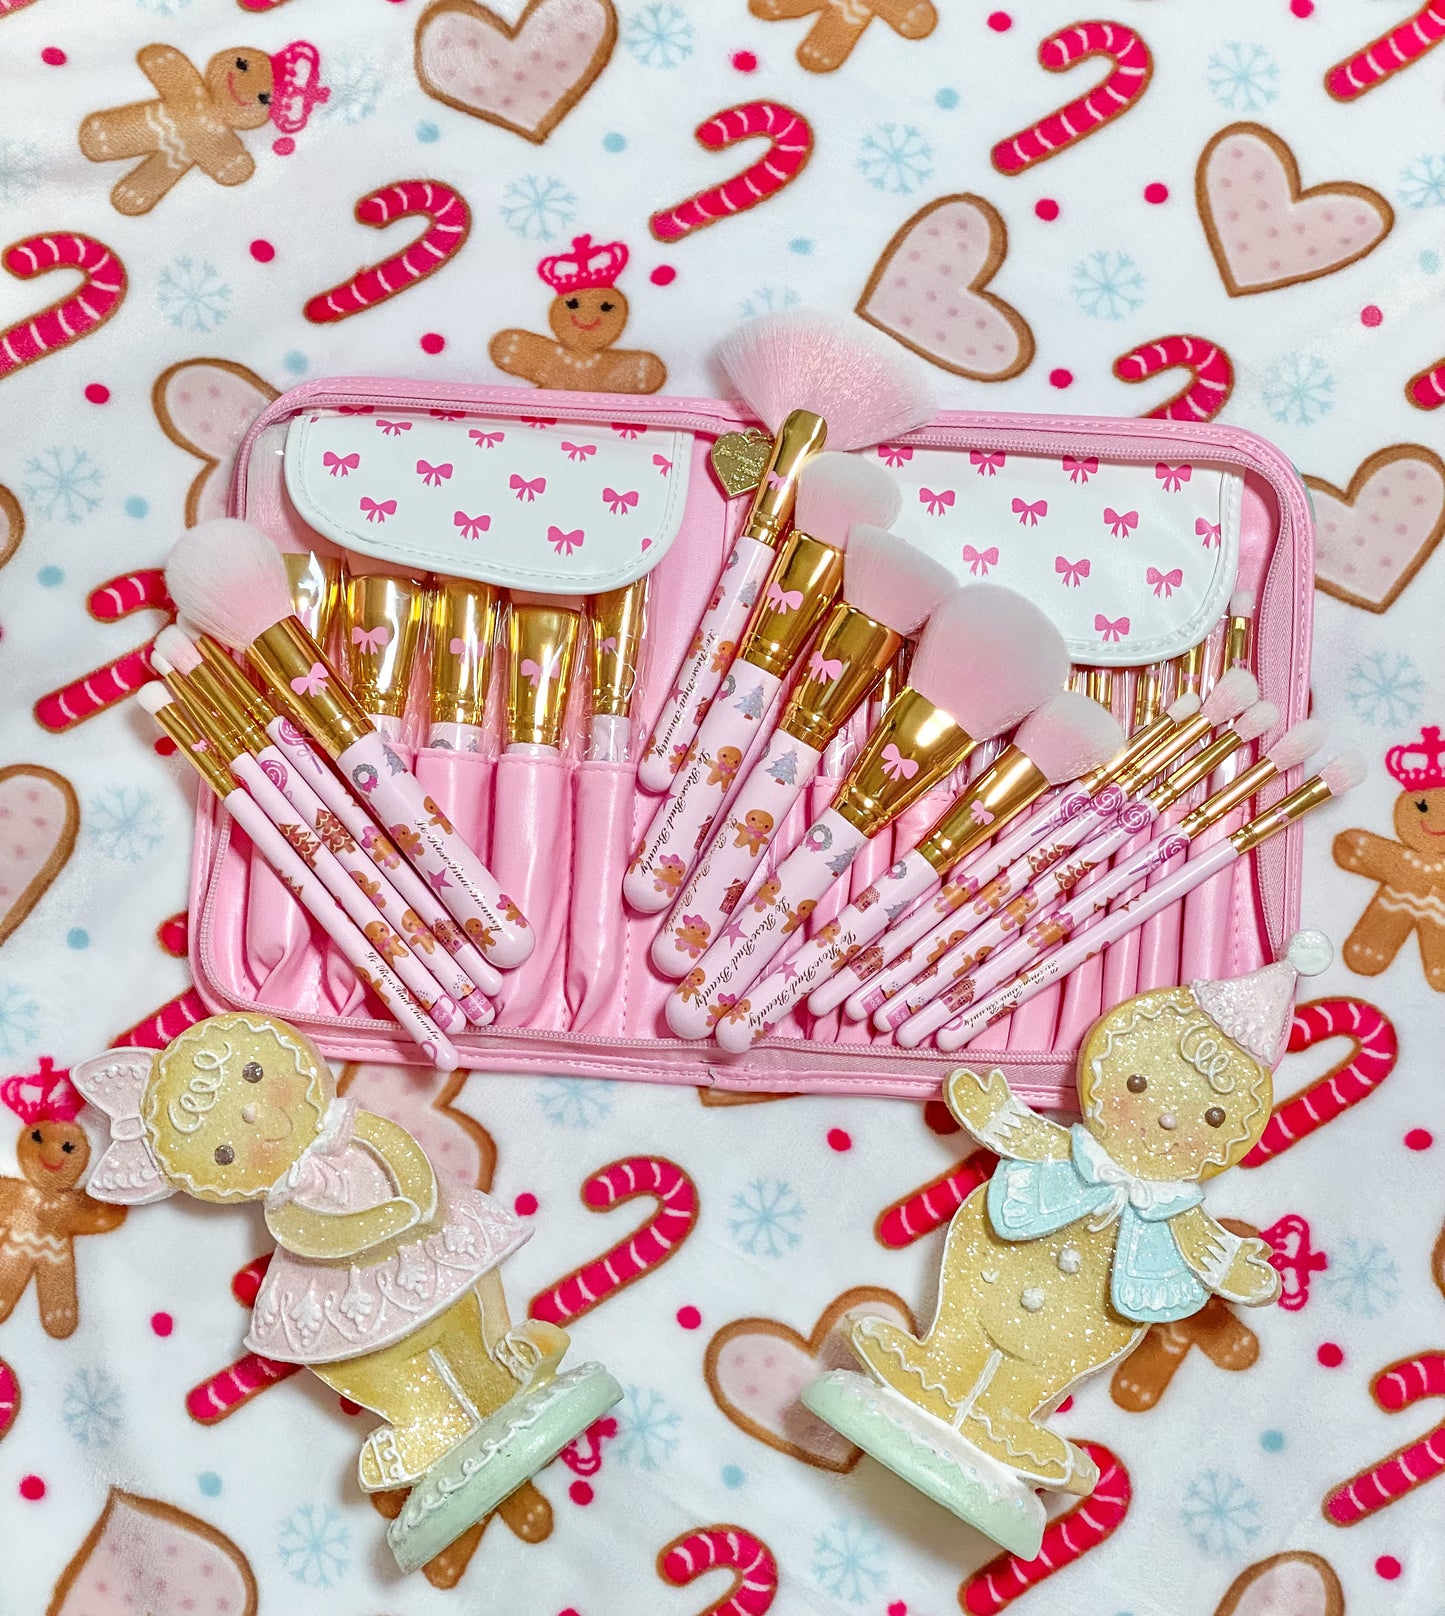 🎀The gingerbread candy lane🎀